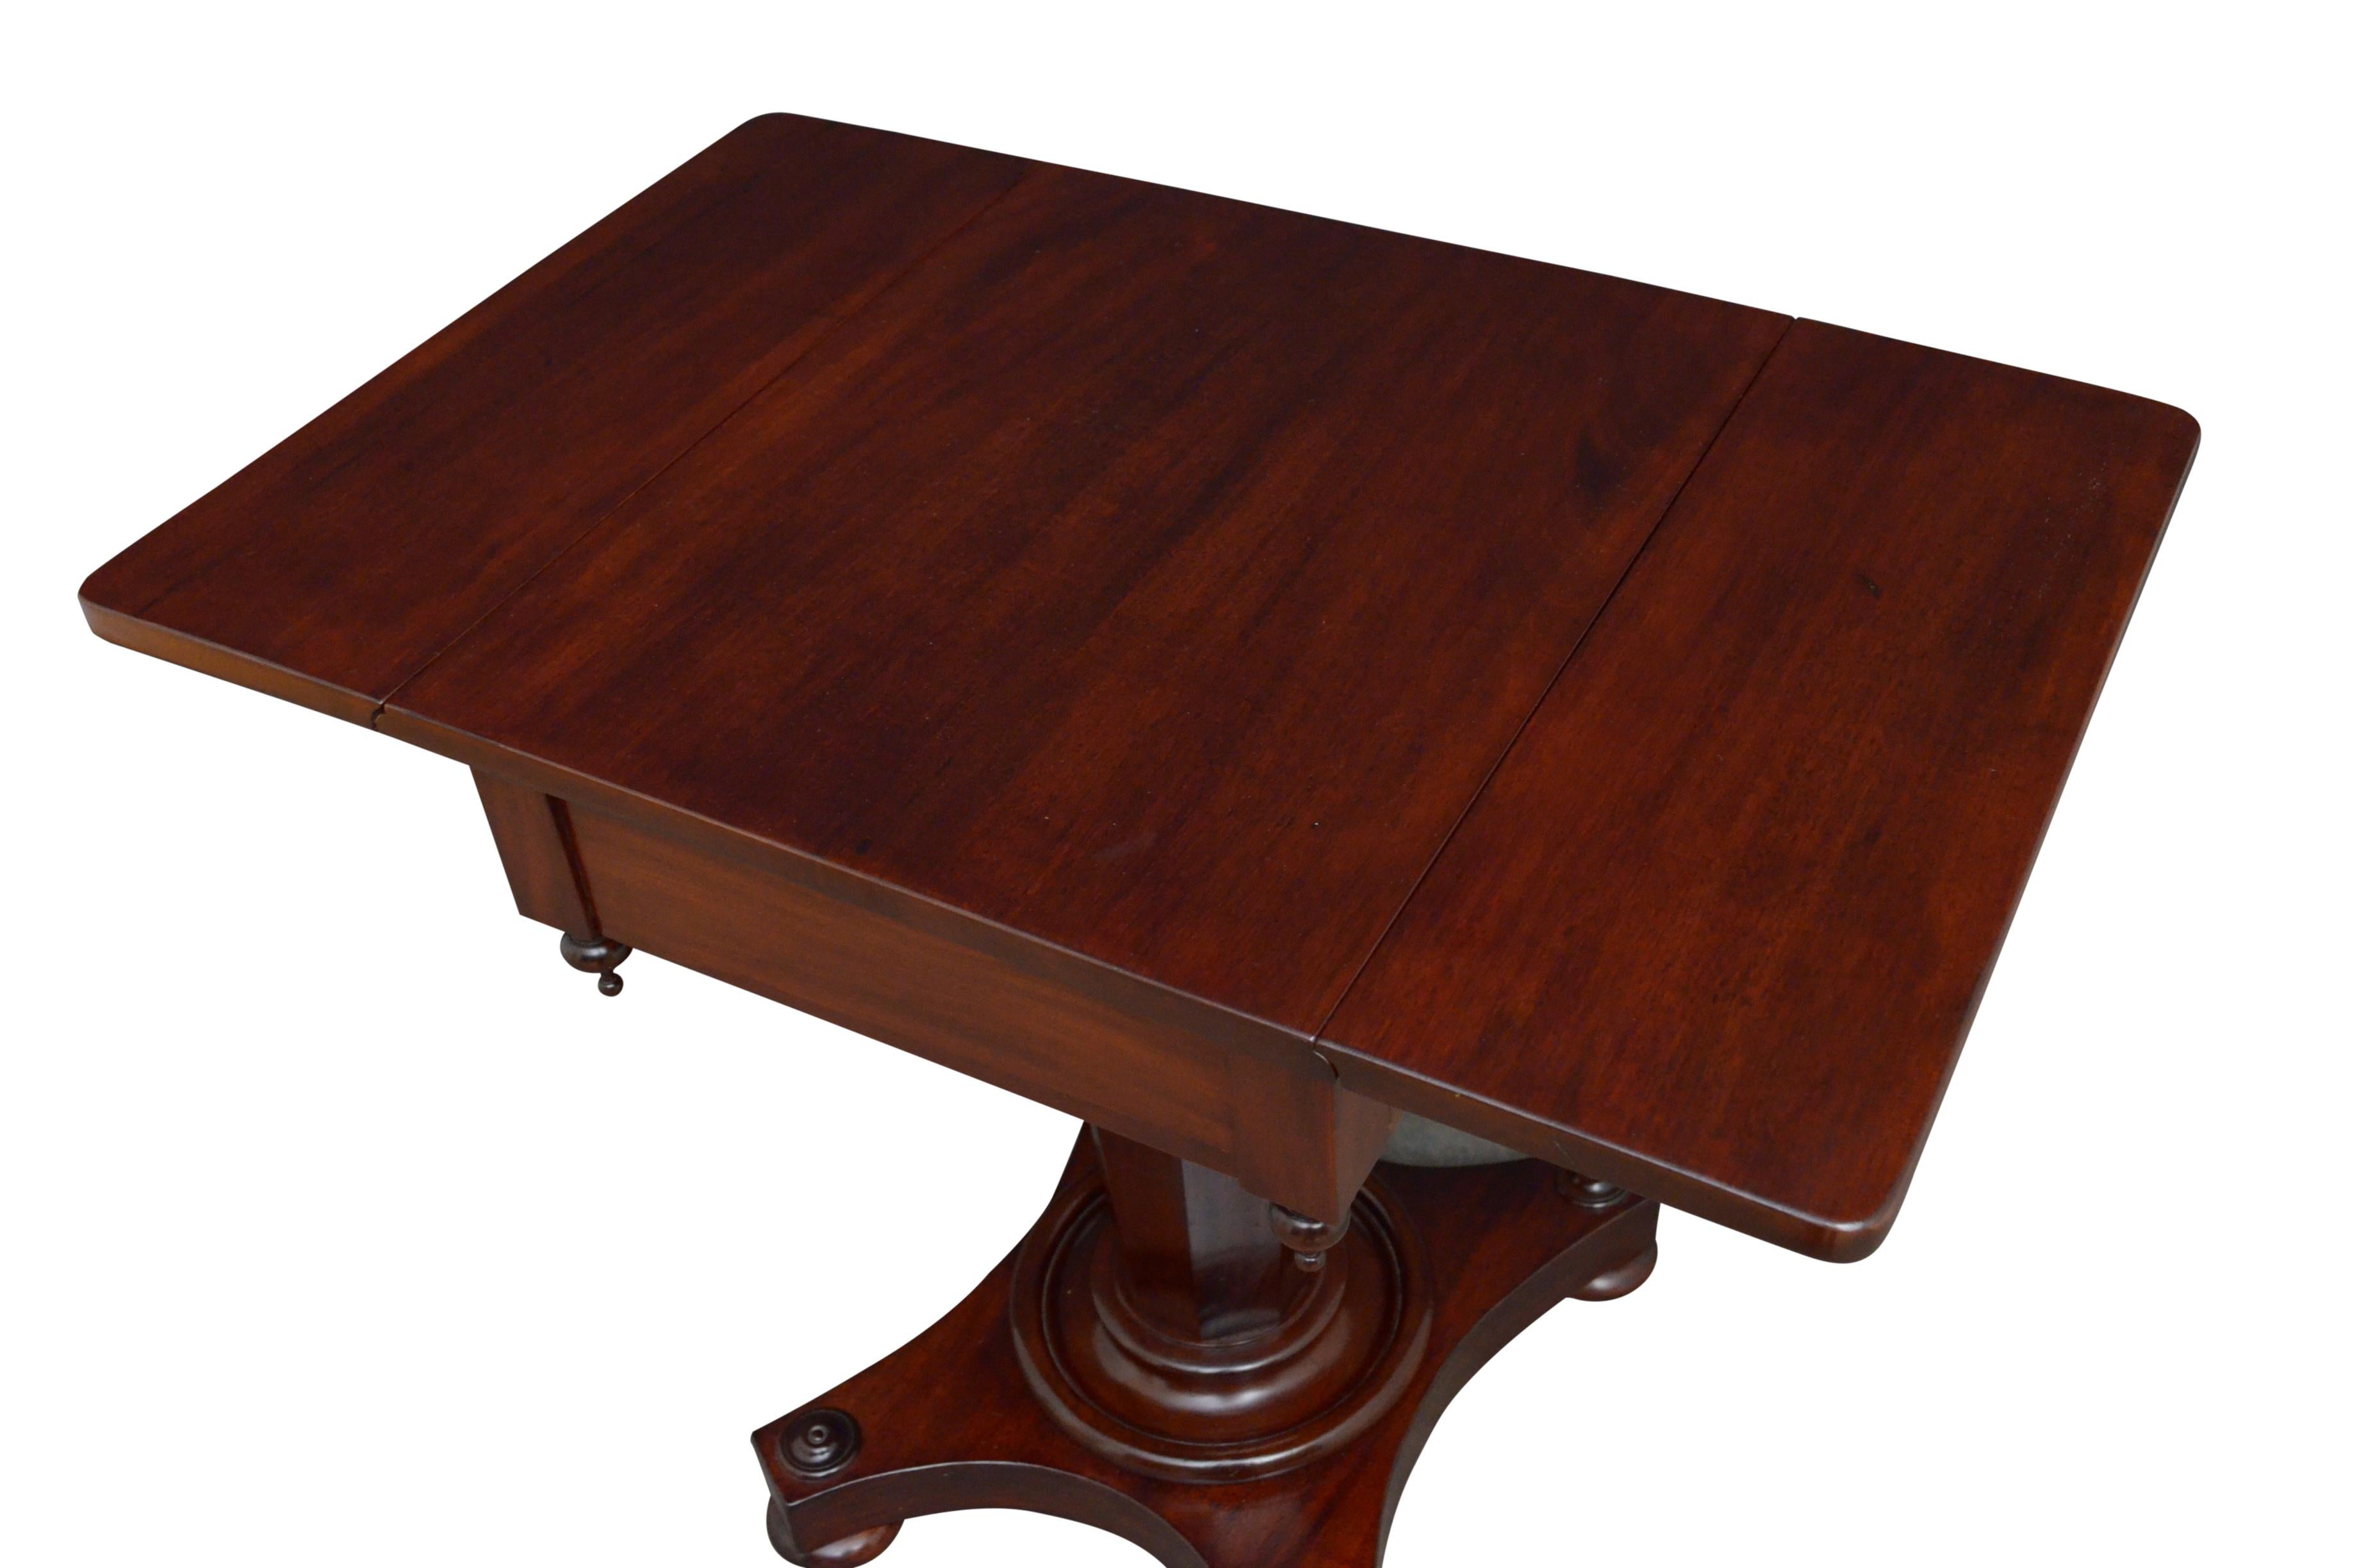 European William IV / Early Victorian Mahogany Drop Leaf Table For Sale